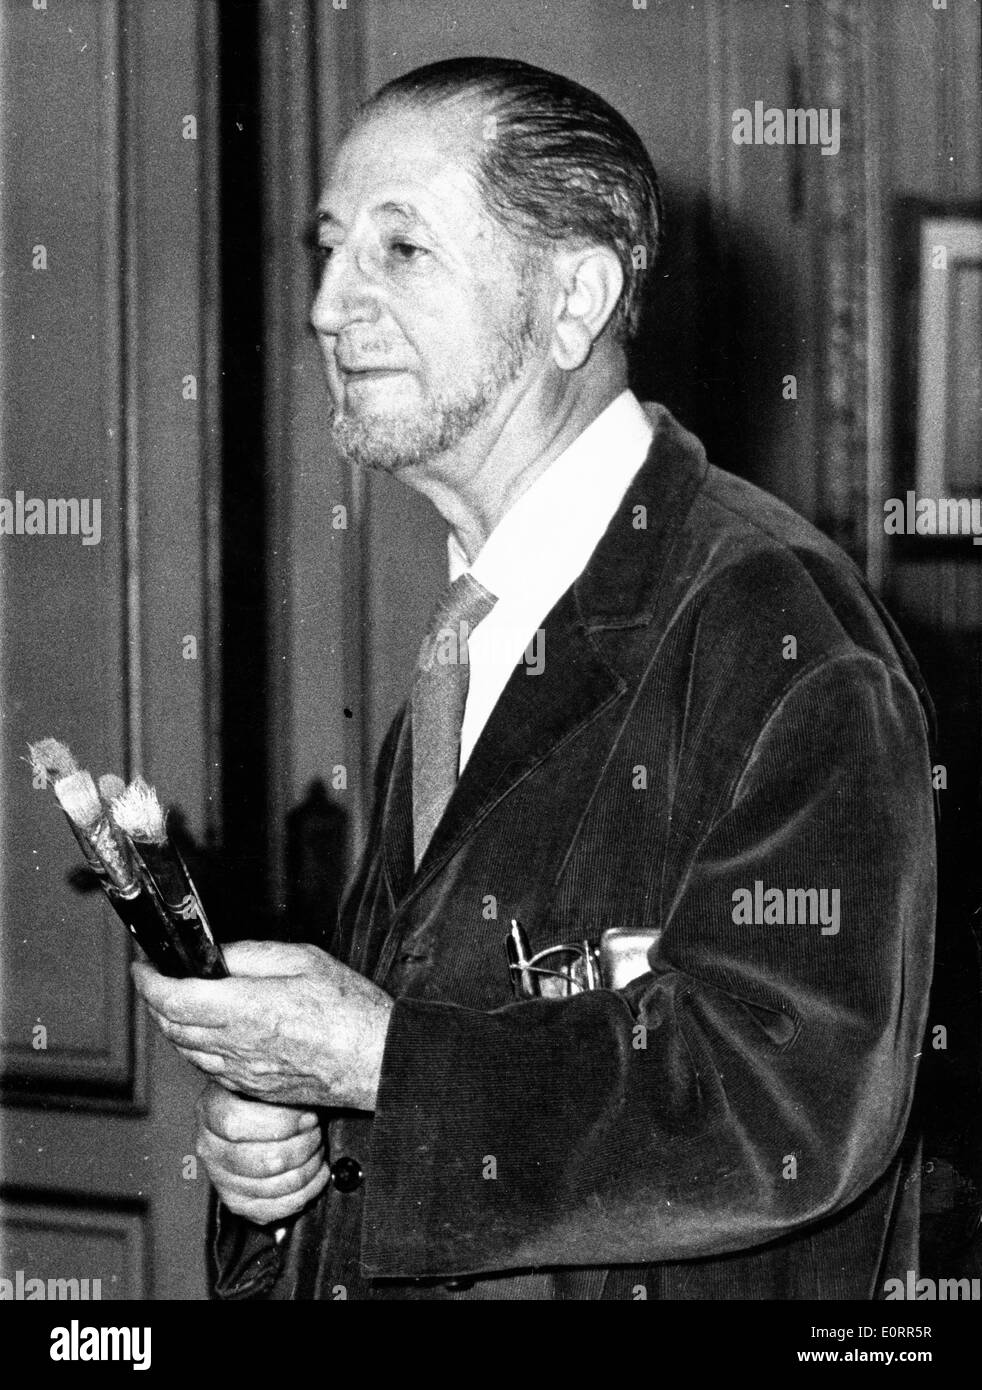 Jean gabriel Black and White Stock Photos & Images - Alamy